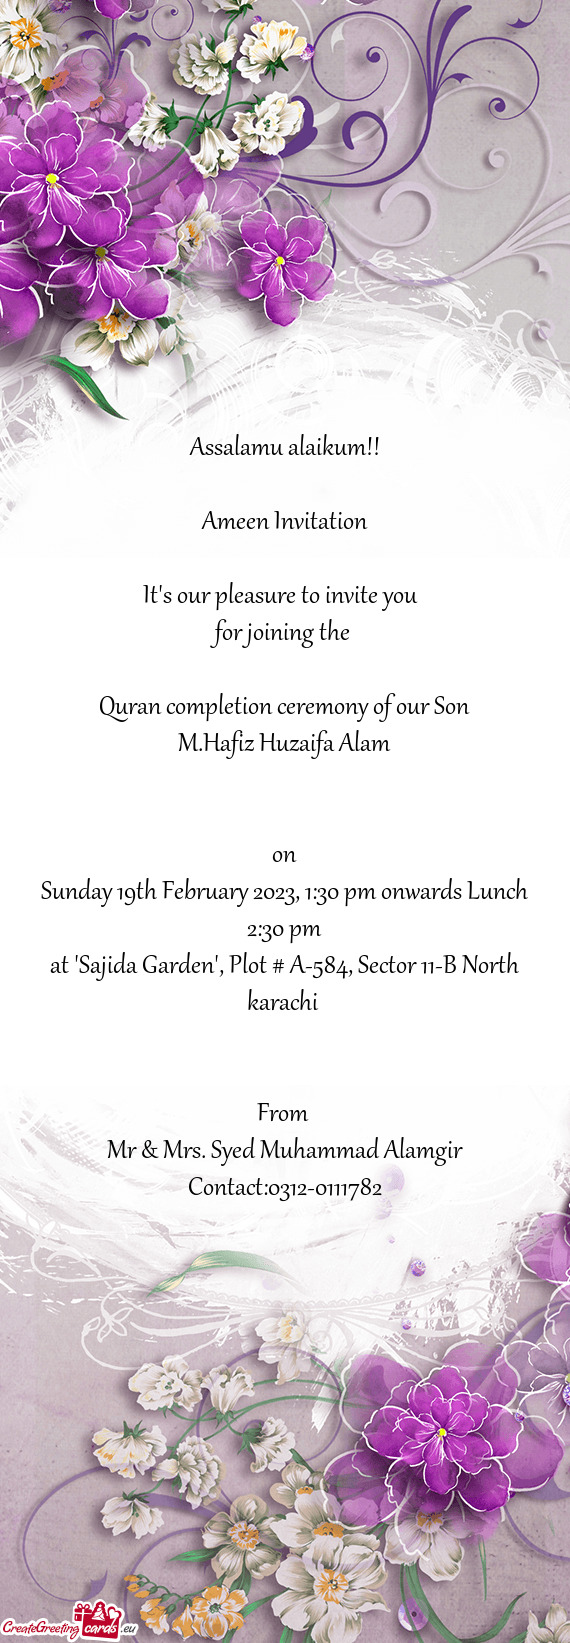 Sunday 19th February 2023, 1:30 pm onwards Lunch 2:30 pm